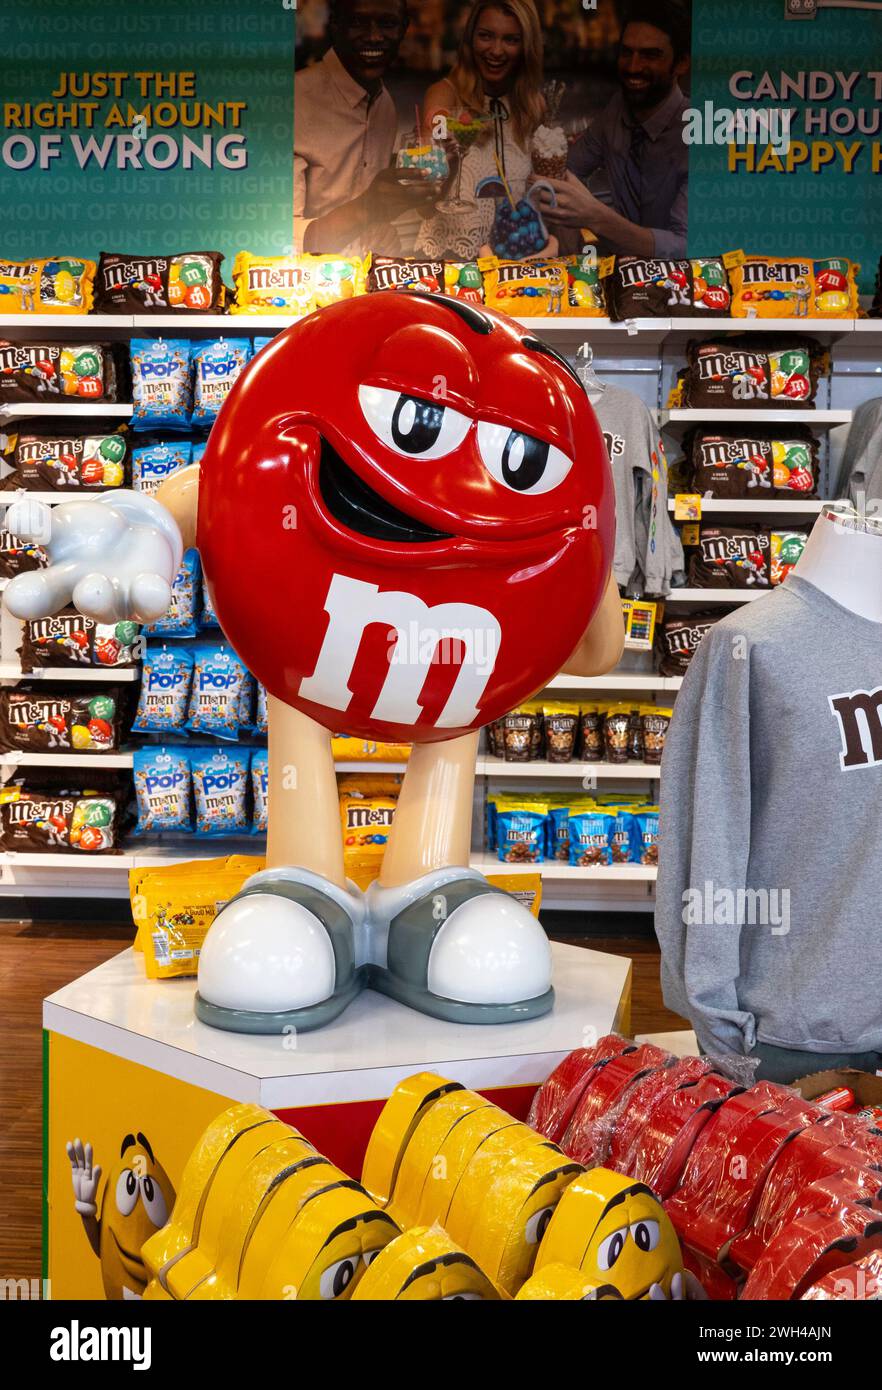 IT'SUGAR Times Square is located on W. 42nd Street and sells popular candy brands, New York City, USA  2024 Stock Photo